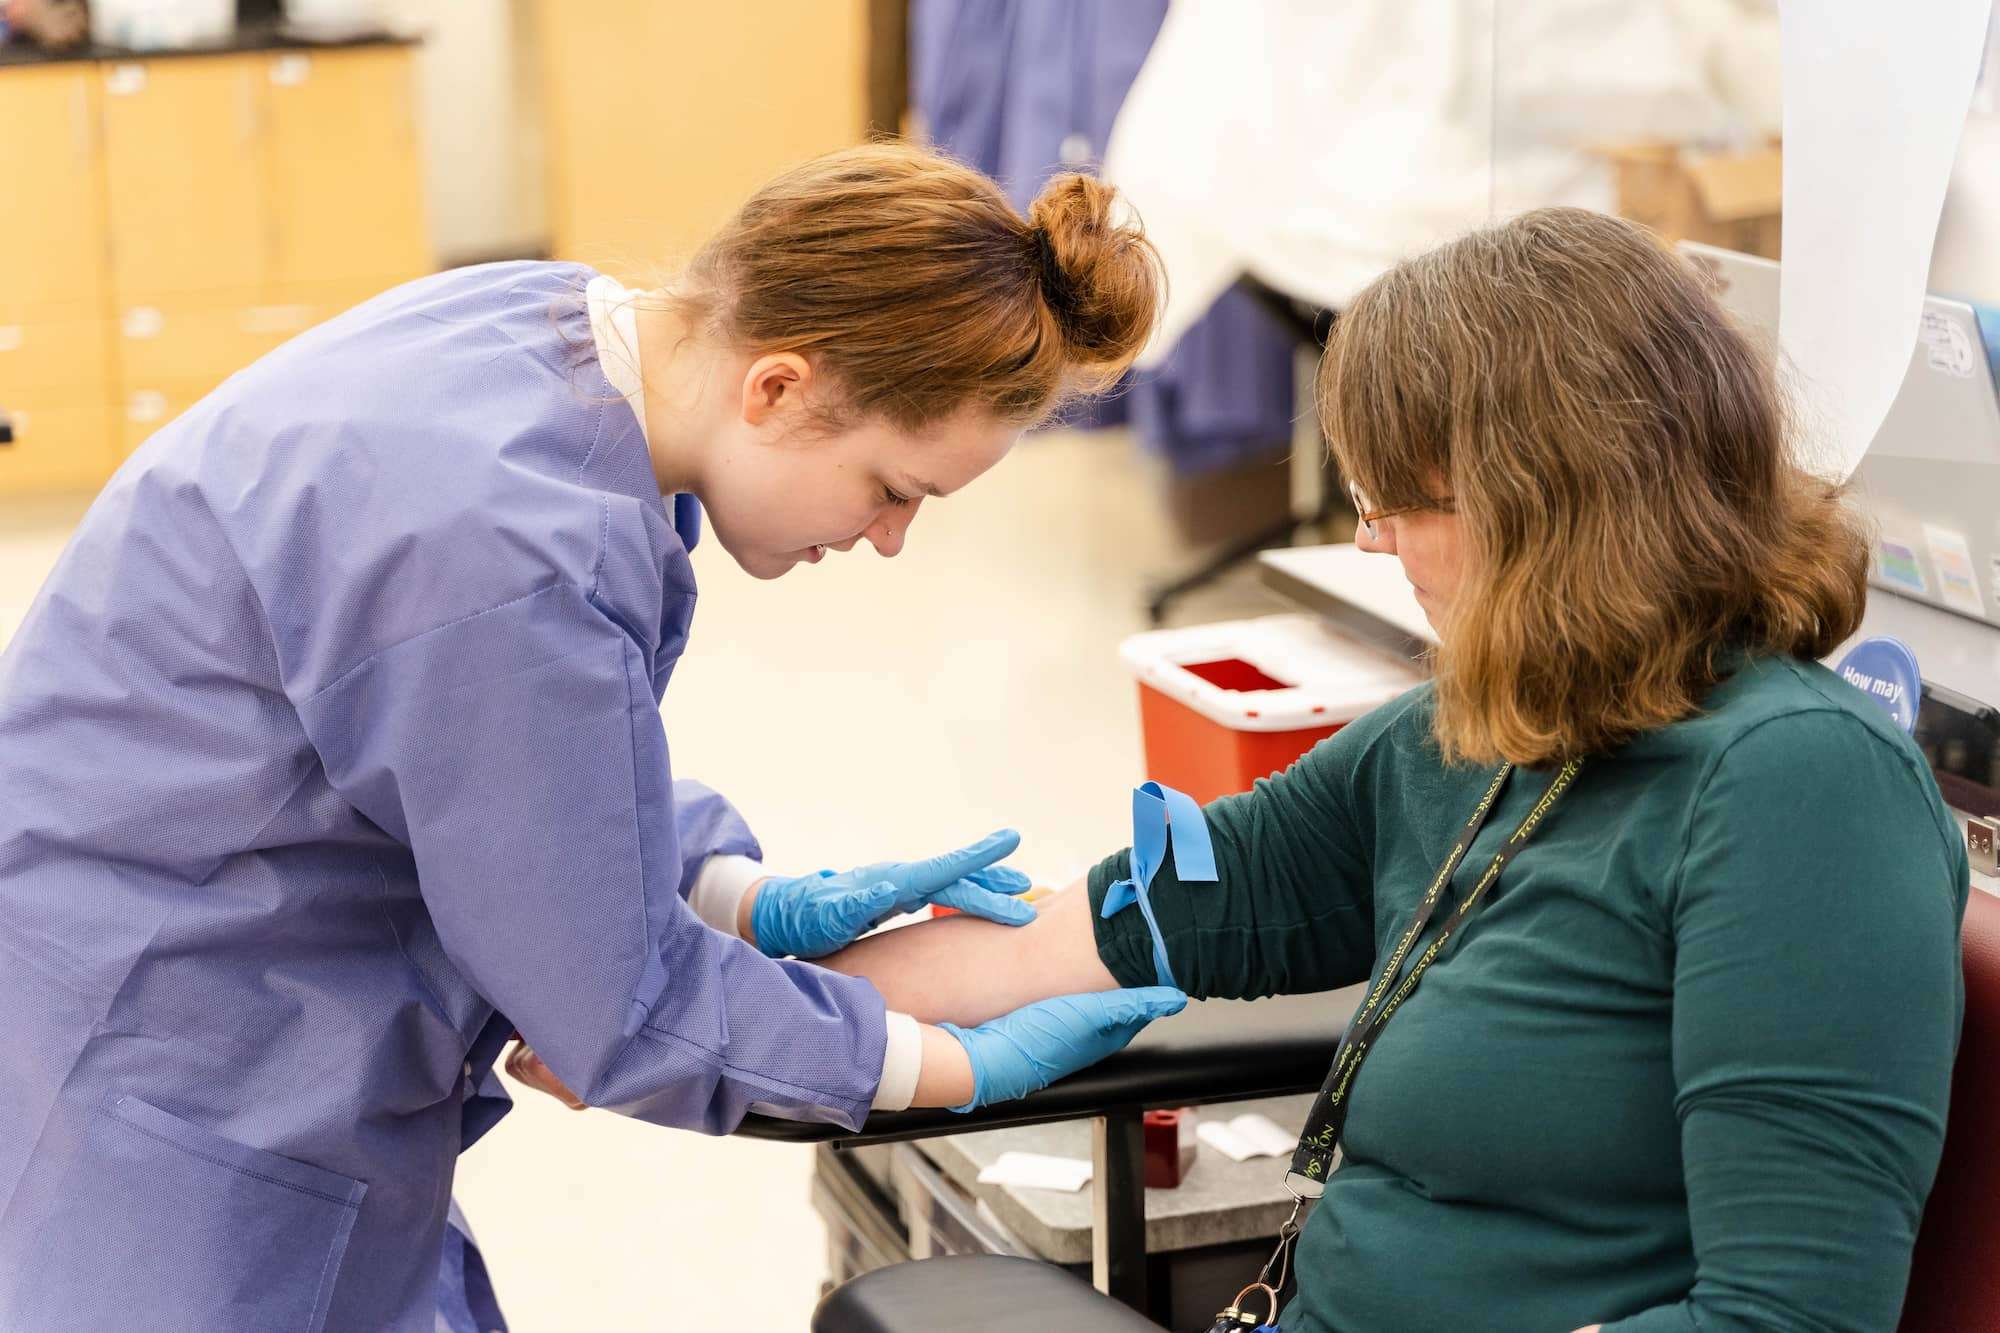 A student wearing rubber gloves presses gently with her fingers on a patient's forearm while finding the position of a vein.